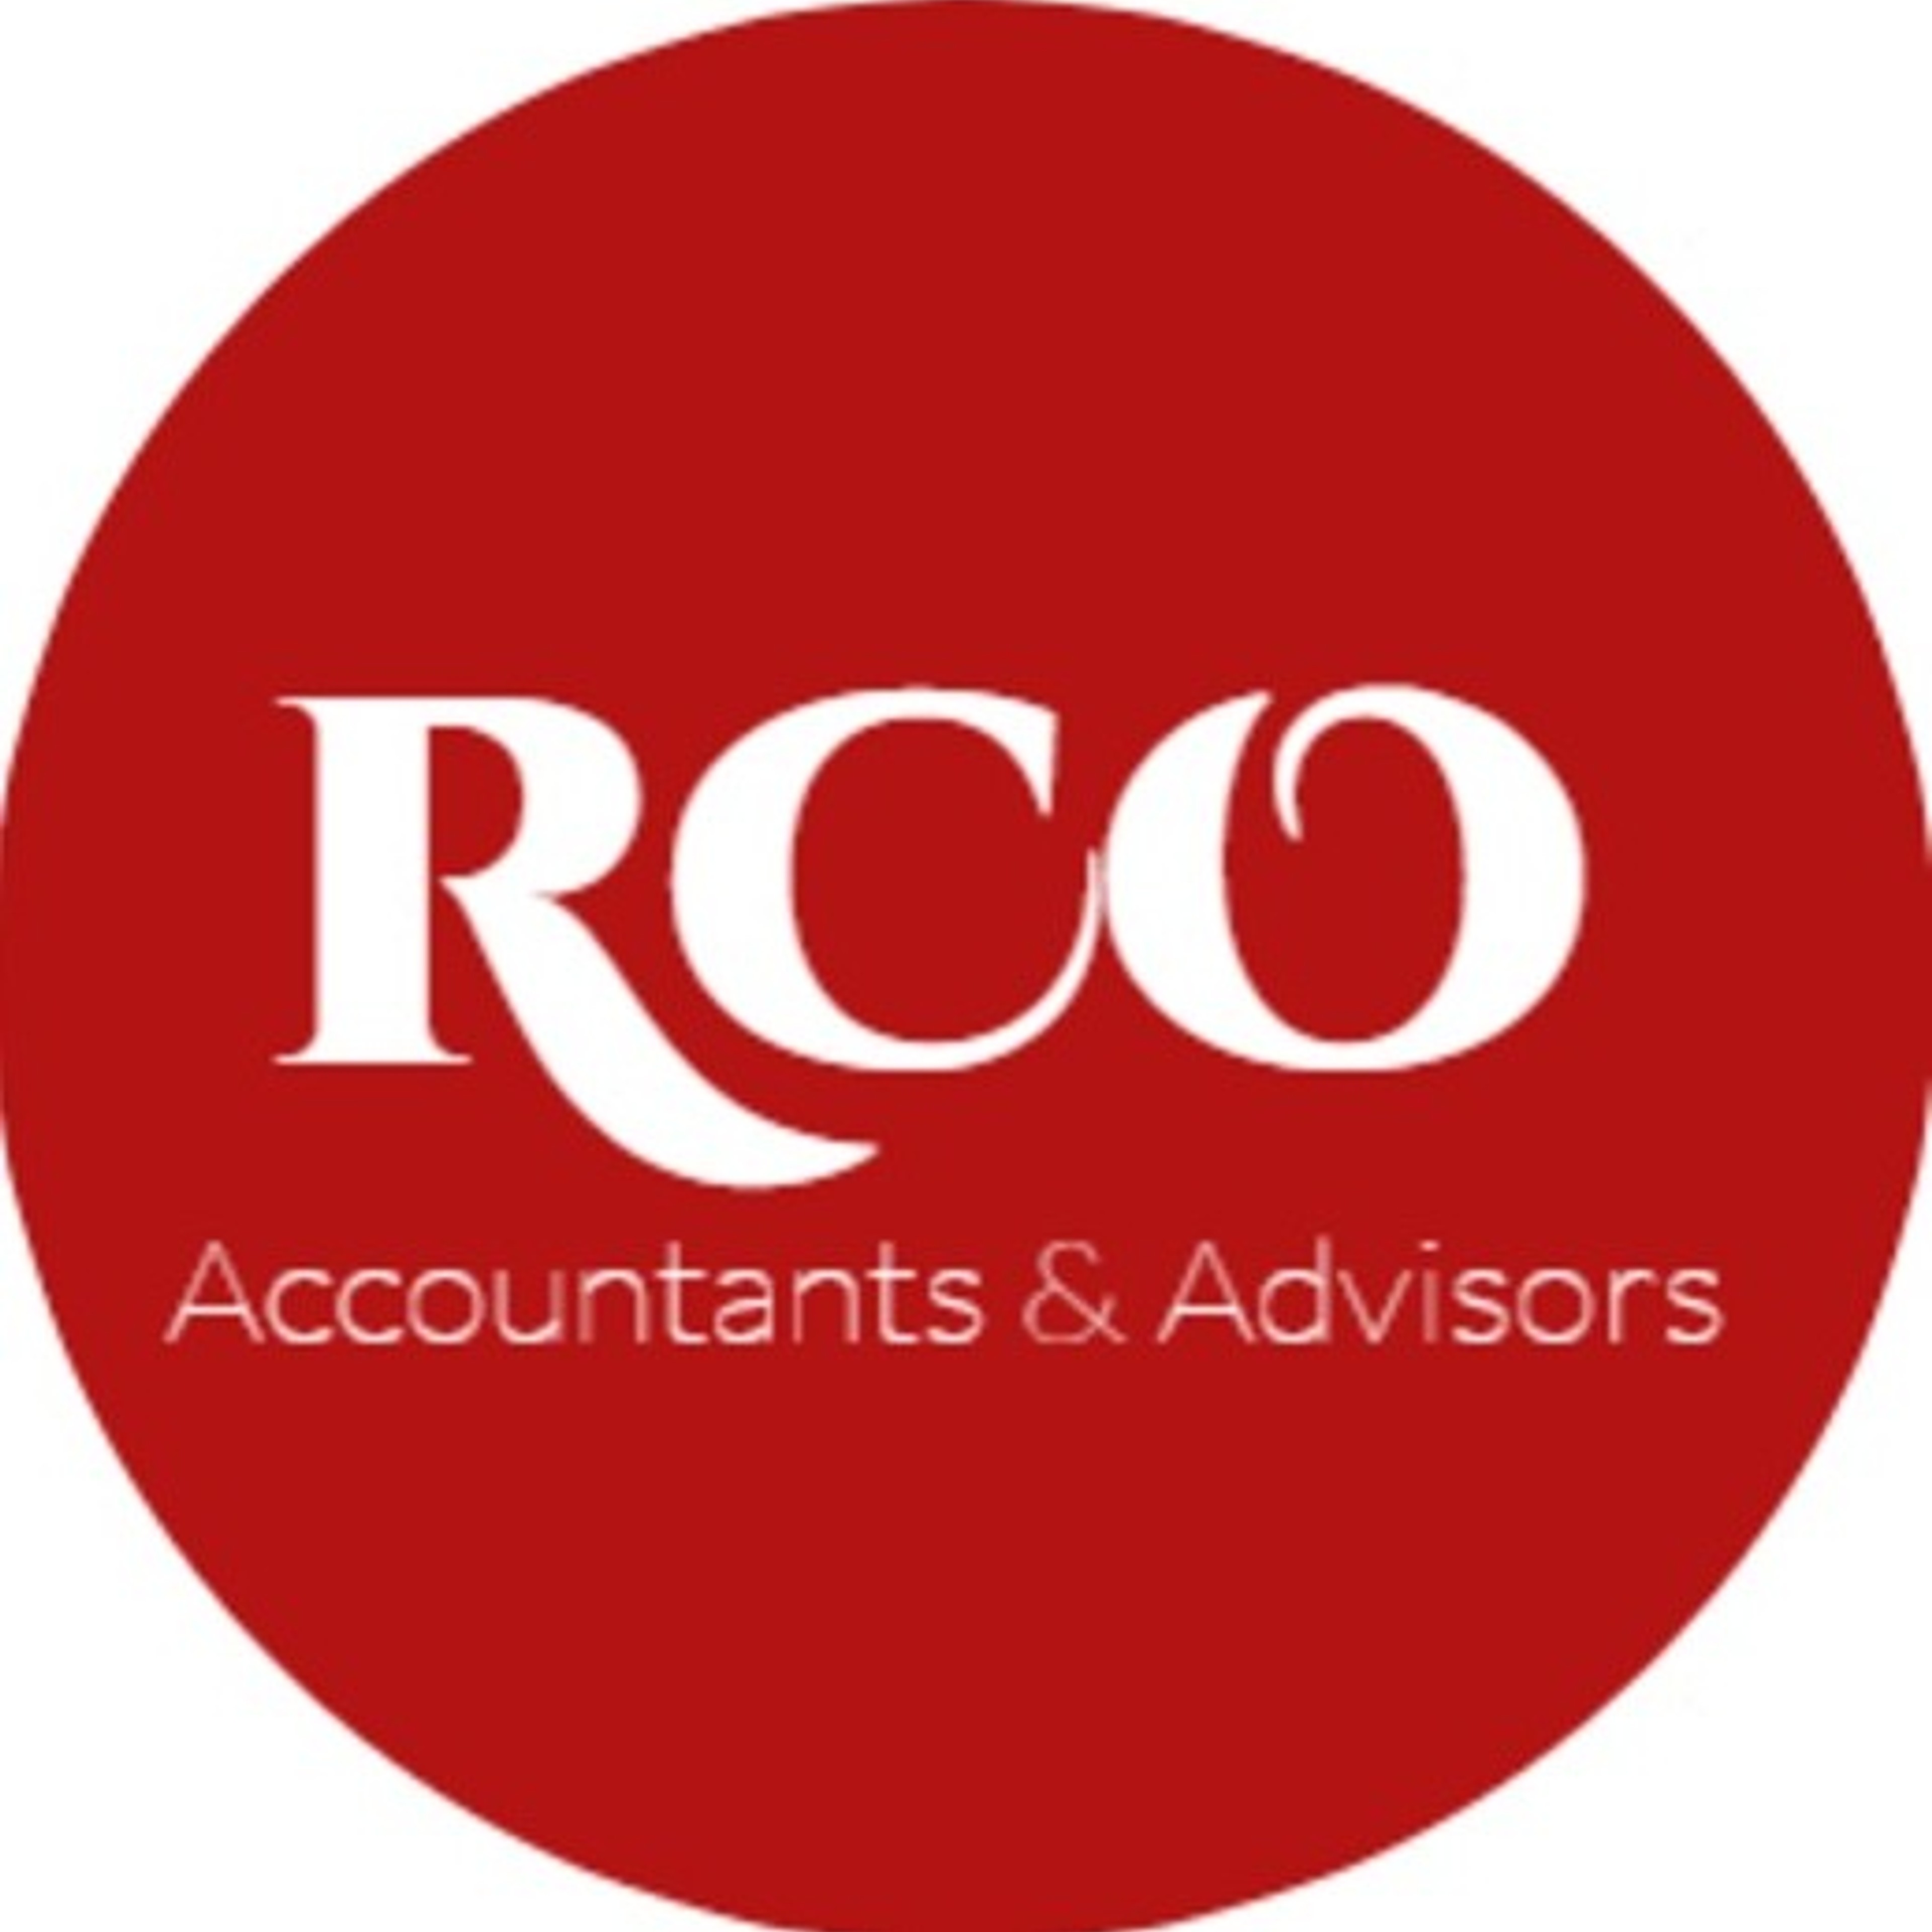 Rostambek & Company Tax accountants and trusted advisors to Business Owners and Individuals